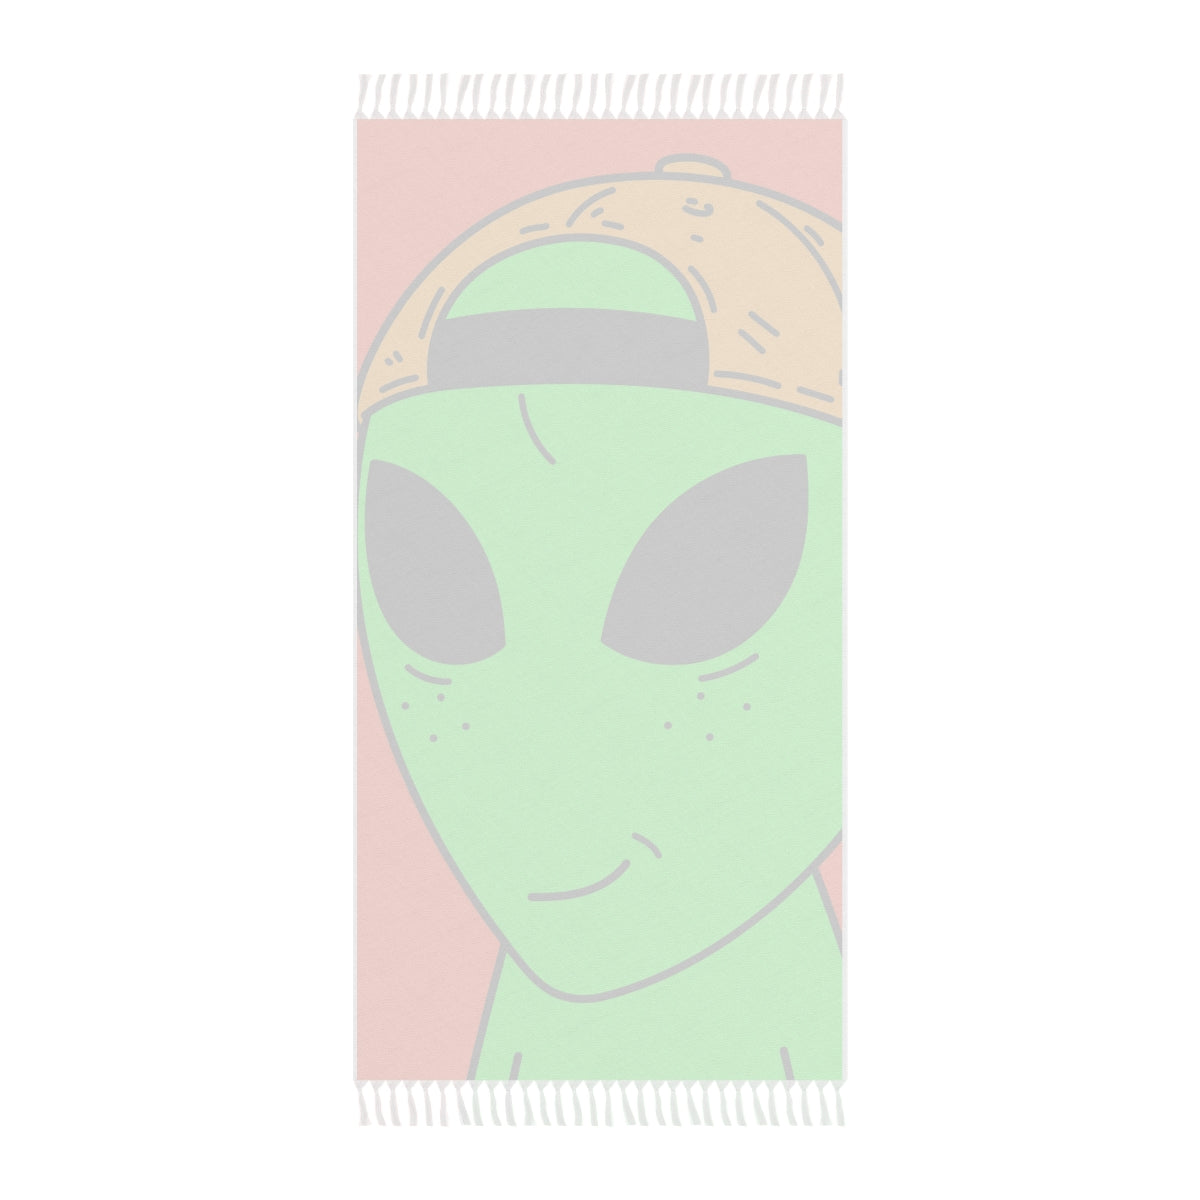 Green Freckle Alien Yellow Hat Visitor Boho Beach Cloth